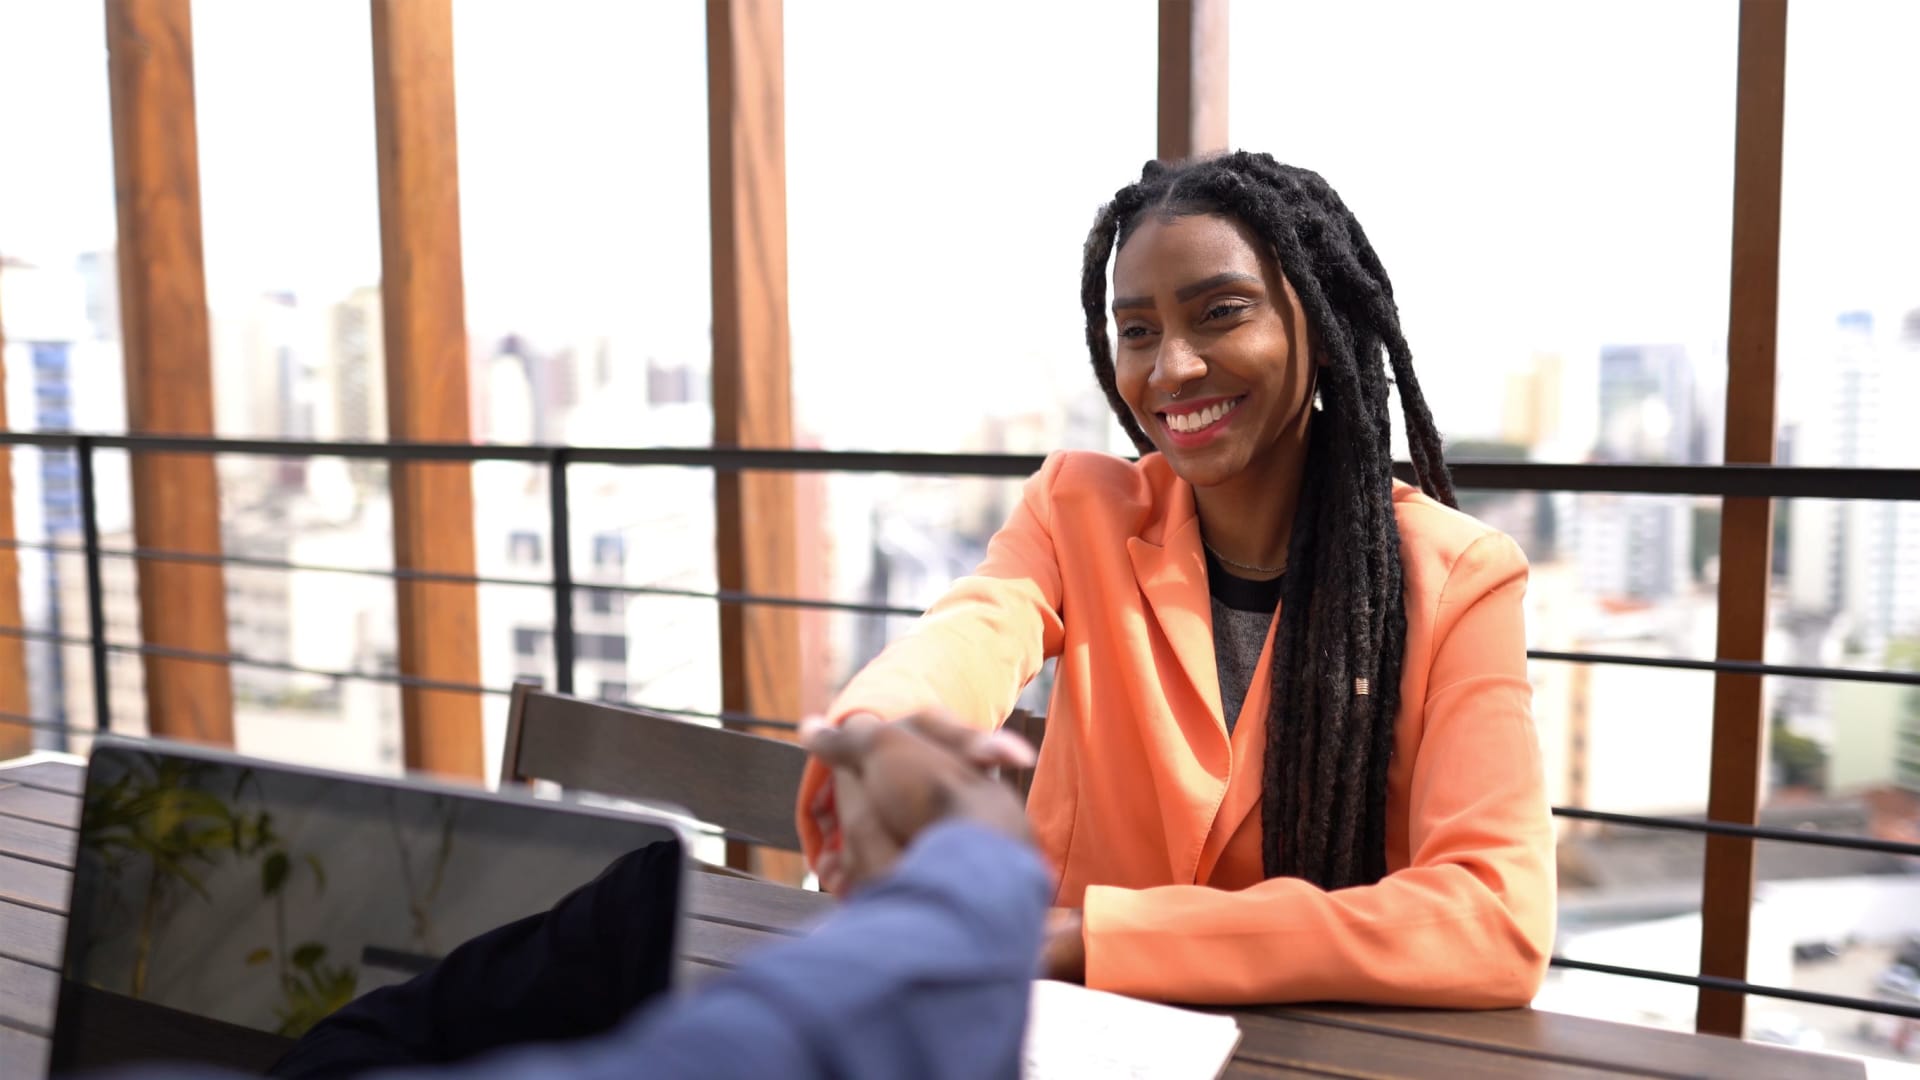 Job interview phrases that are red flags, says ex-Google recruiter [Video]